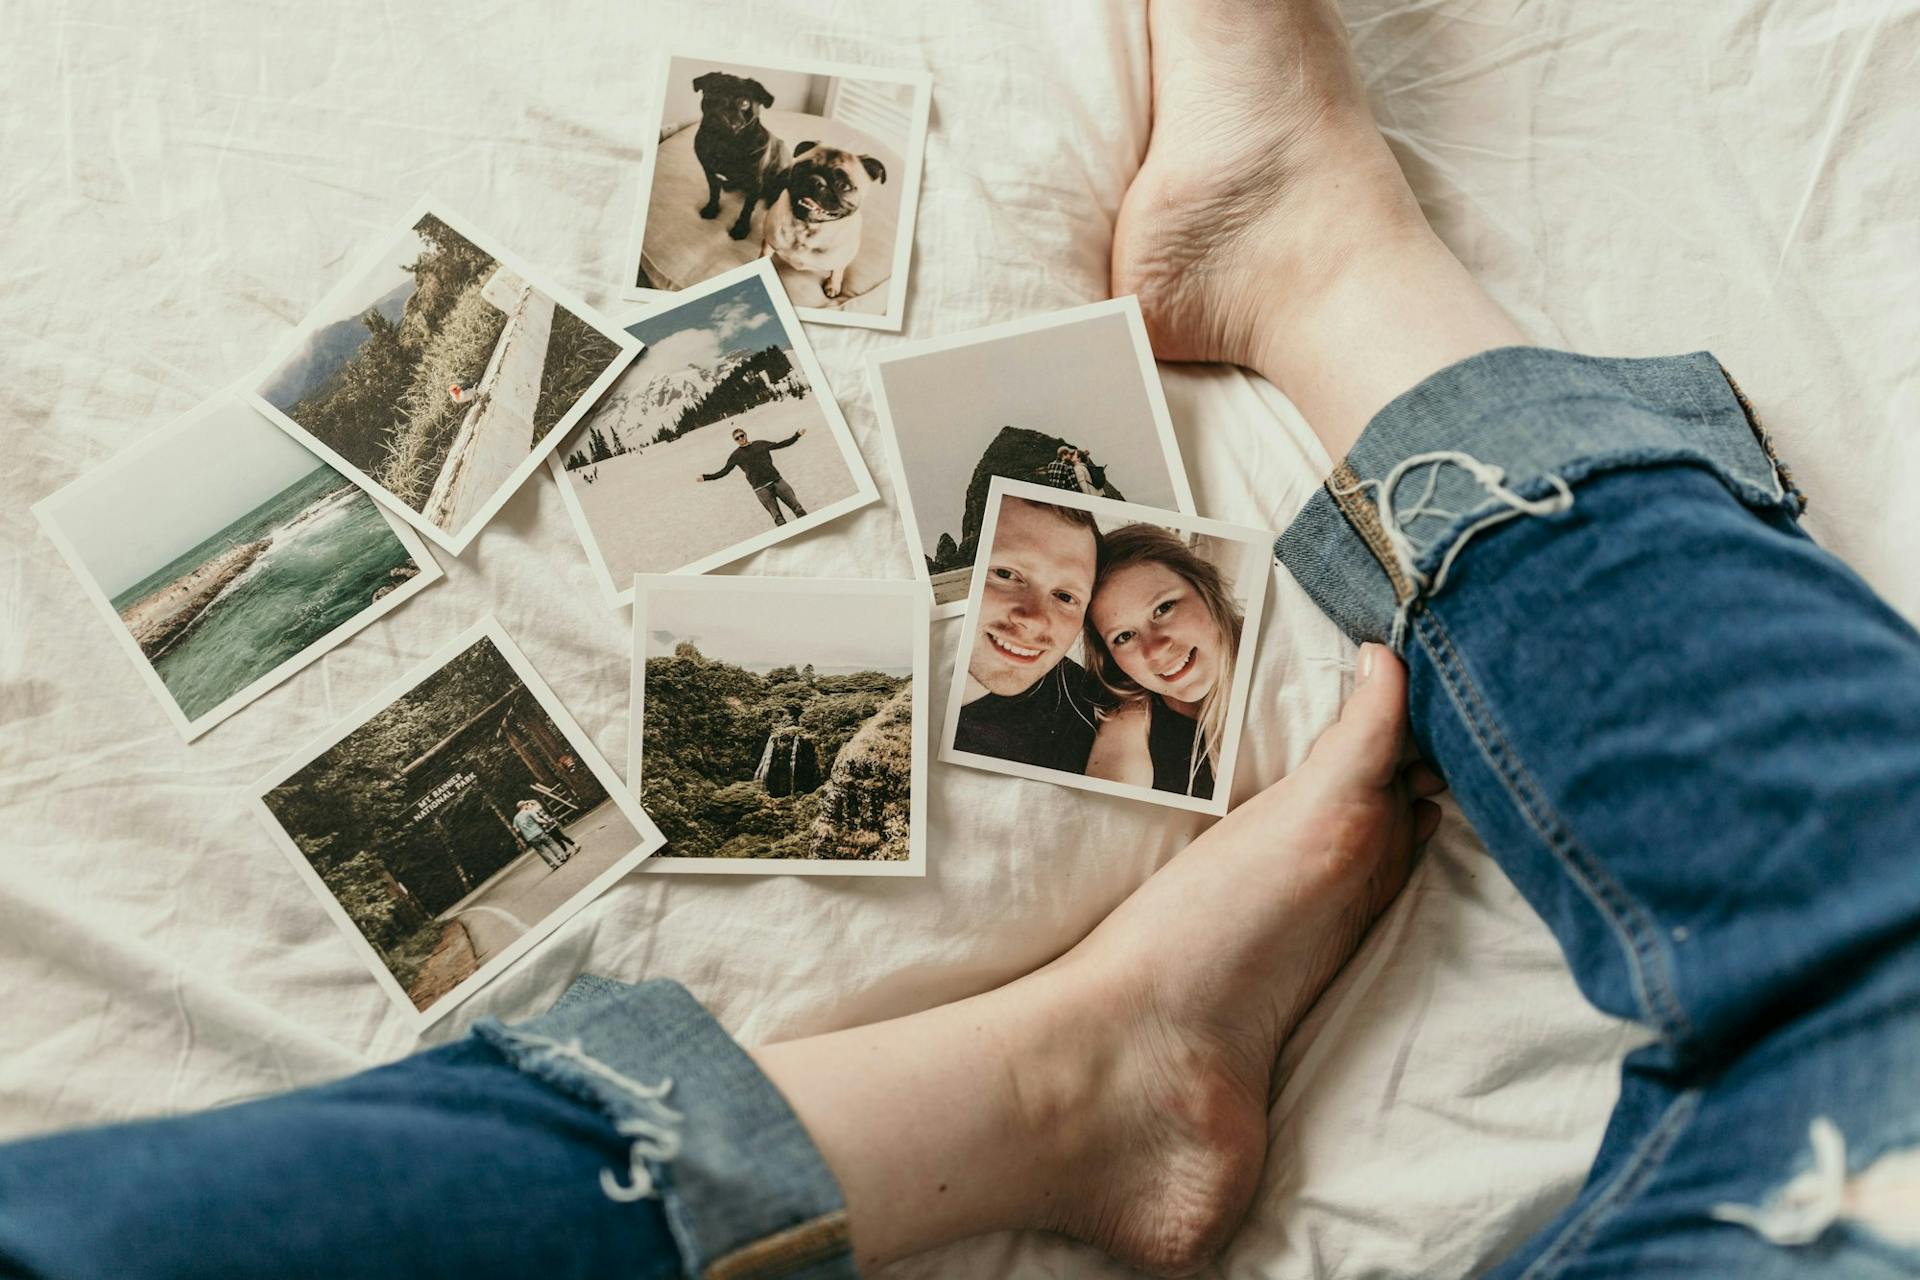 How to collect memories (without cluttering up your home)